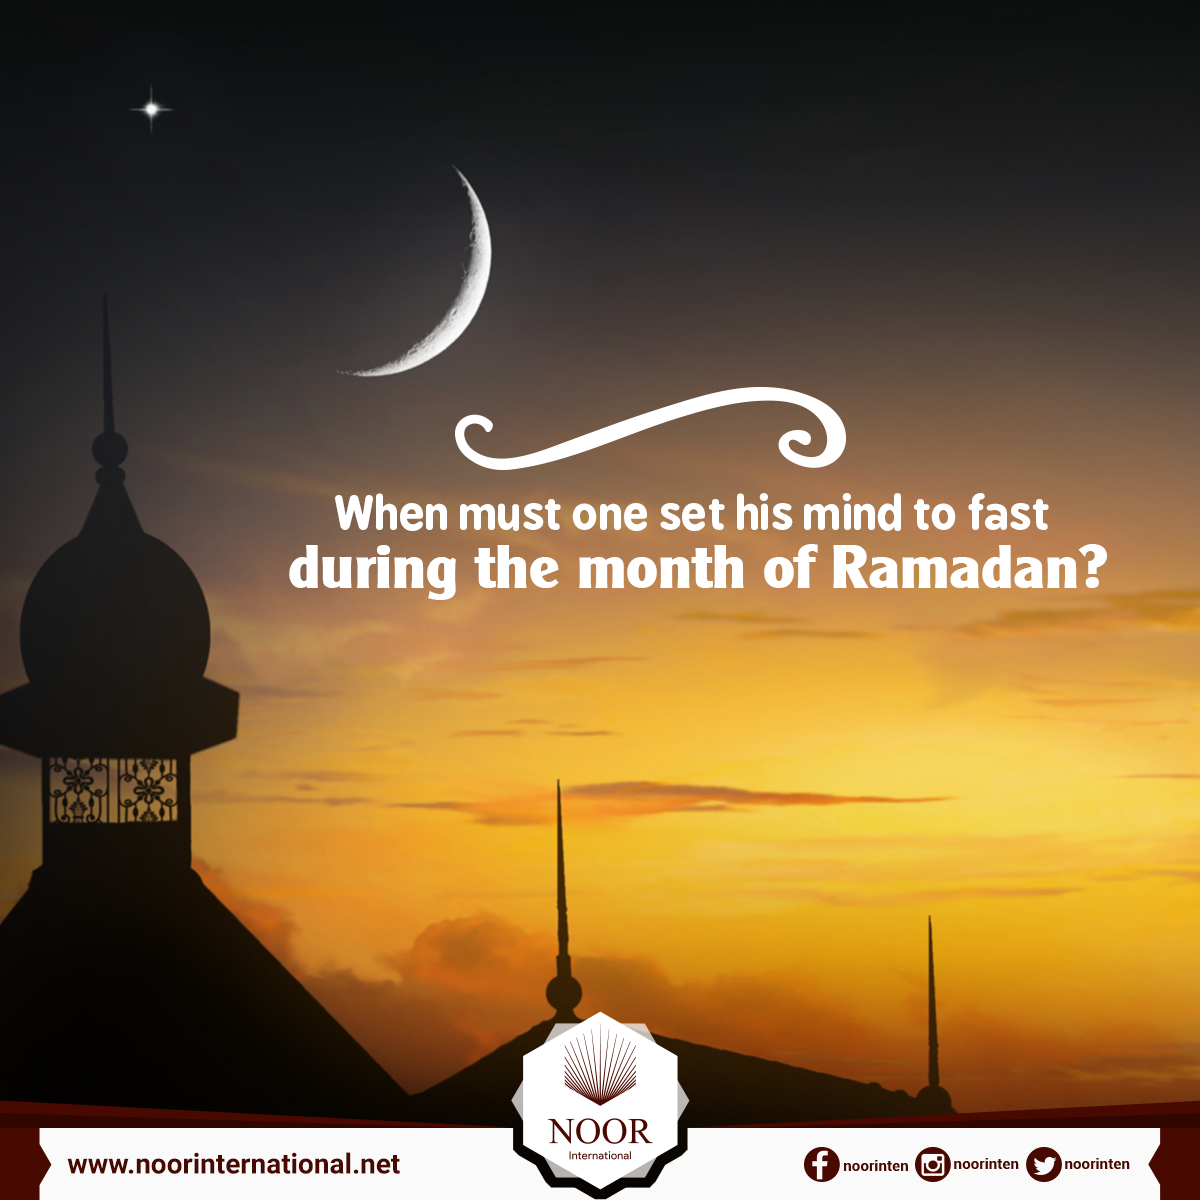 When must one set his mind to fast during the month of Ramadan?